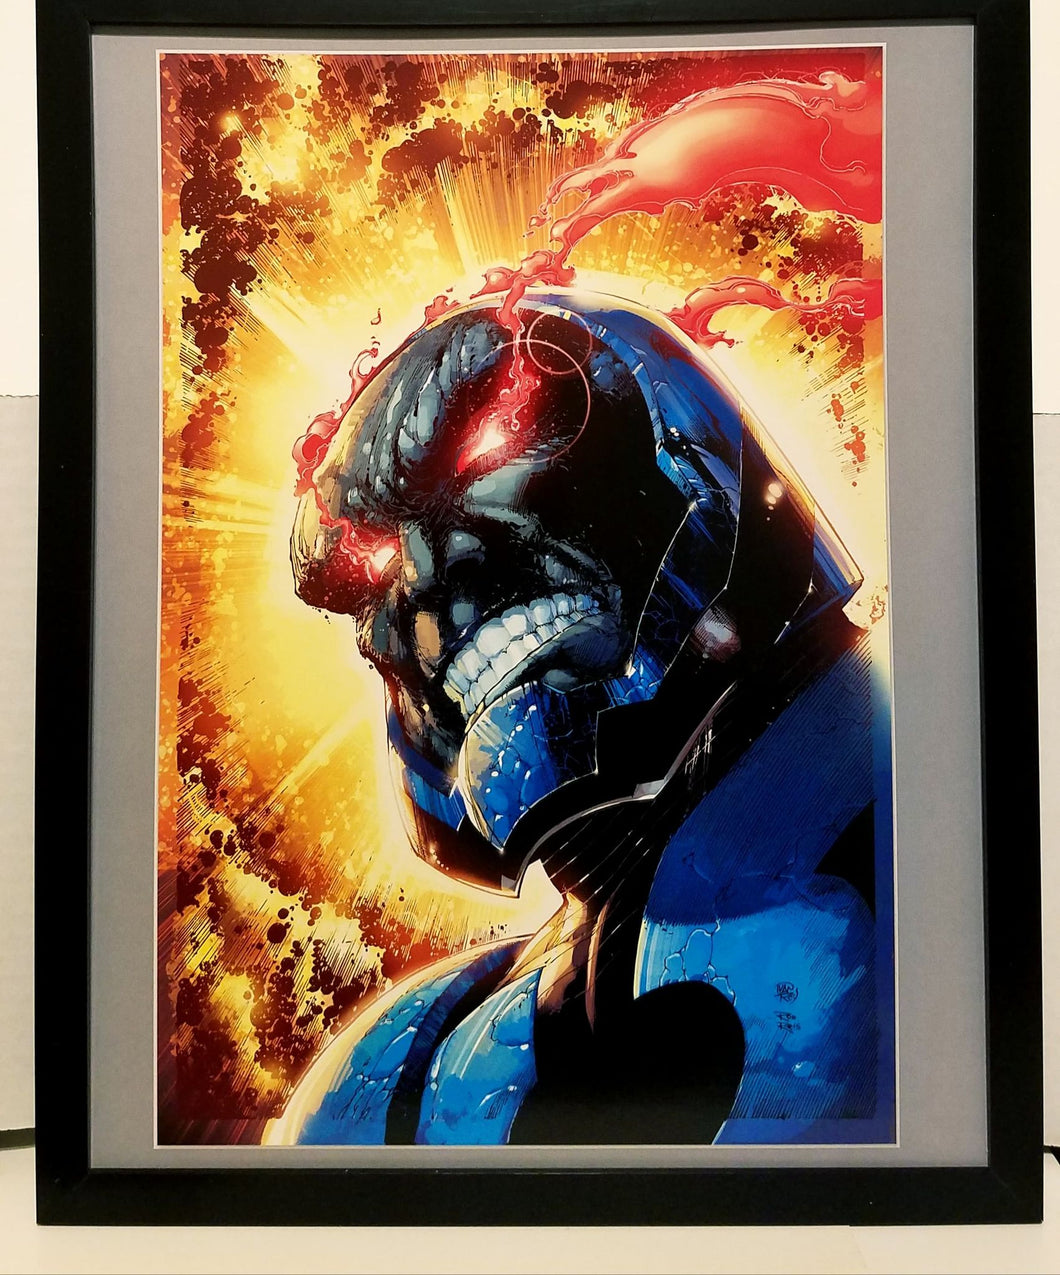 Darkseid from Justice League by Ivan Reis 11x14 FRAMED DC Comics Art Print Poster